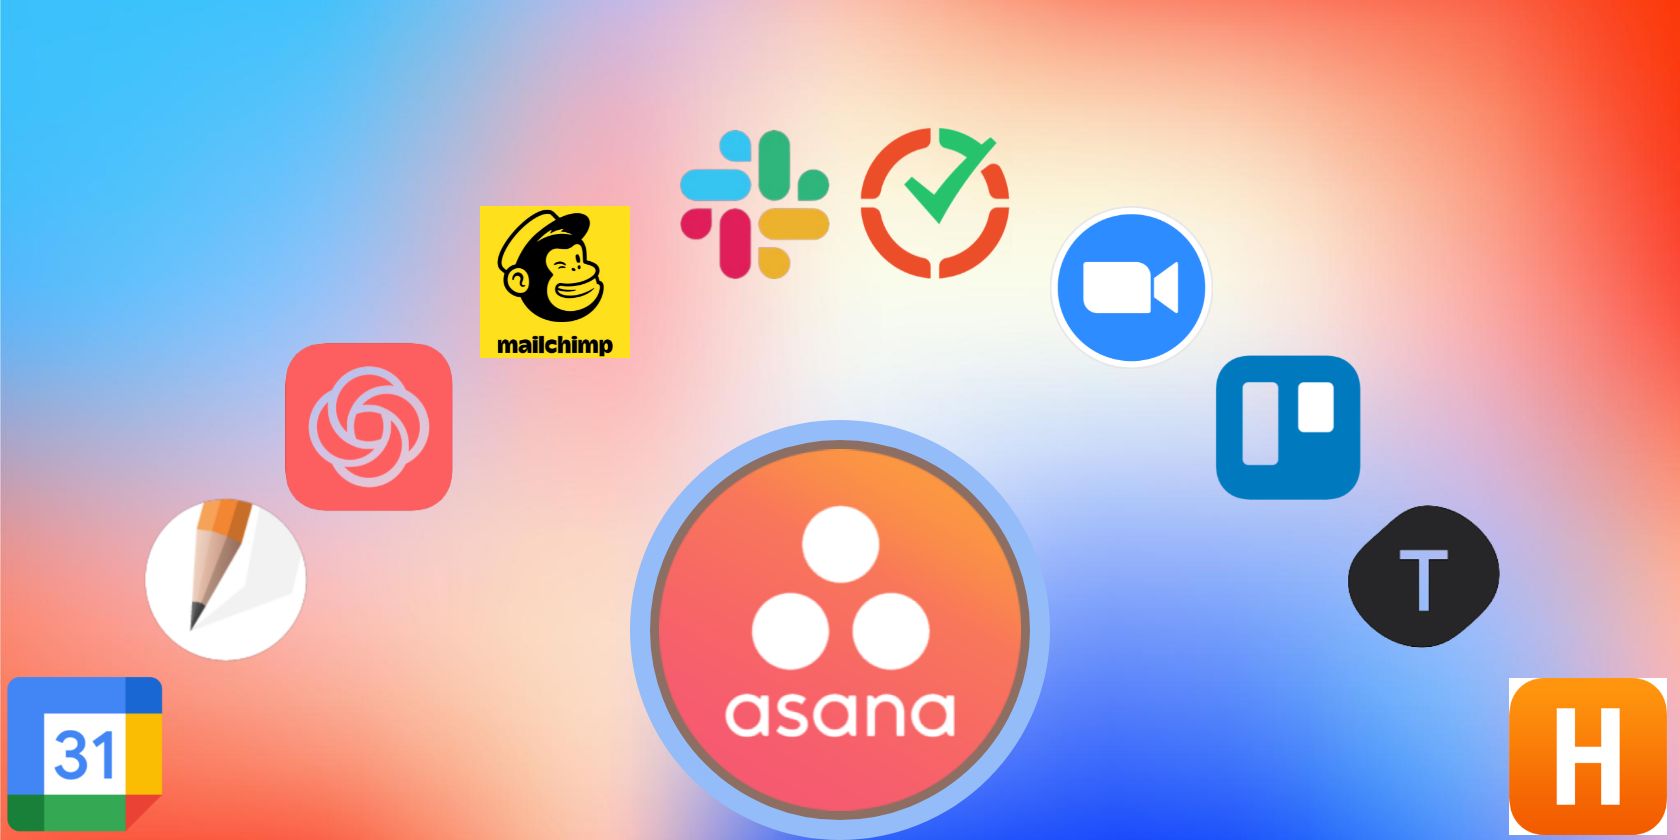 The 10 Best Asana Integrations You Should Check Out